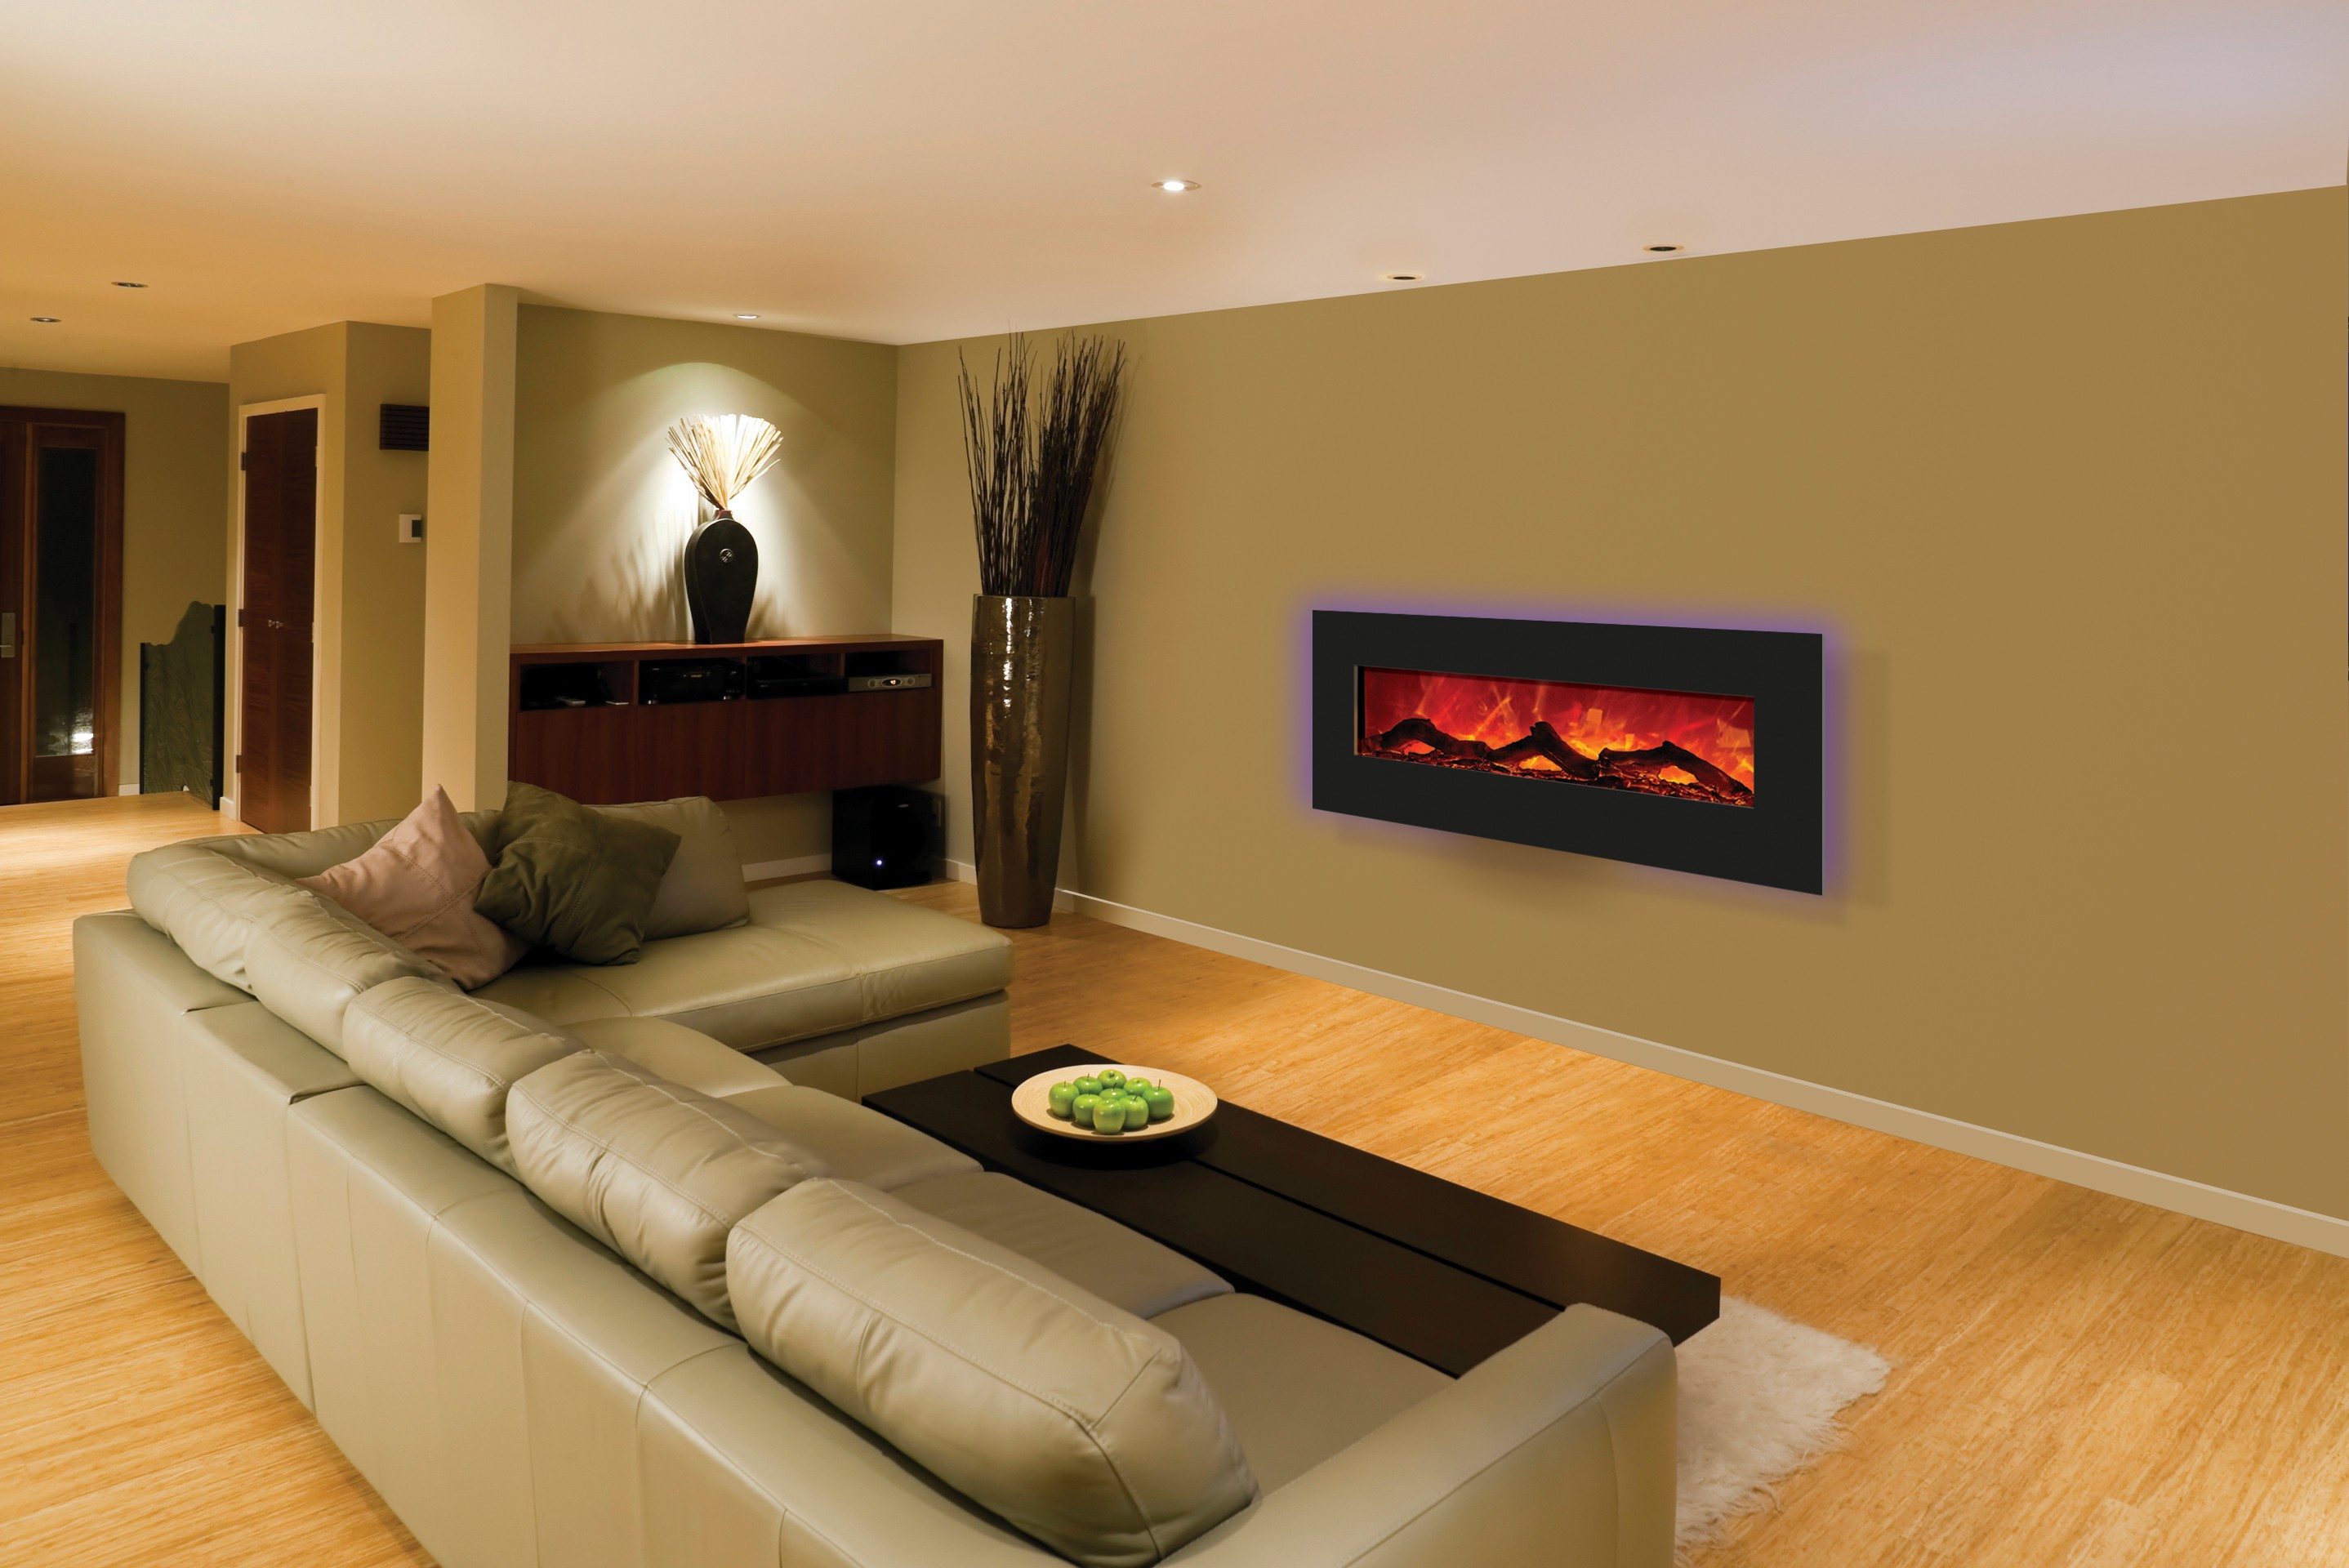 Artificial Fireplace Awesome Cool Electric Fireplace Ideas Fireplace Design Ideas